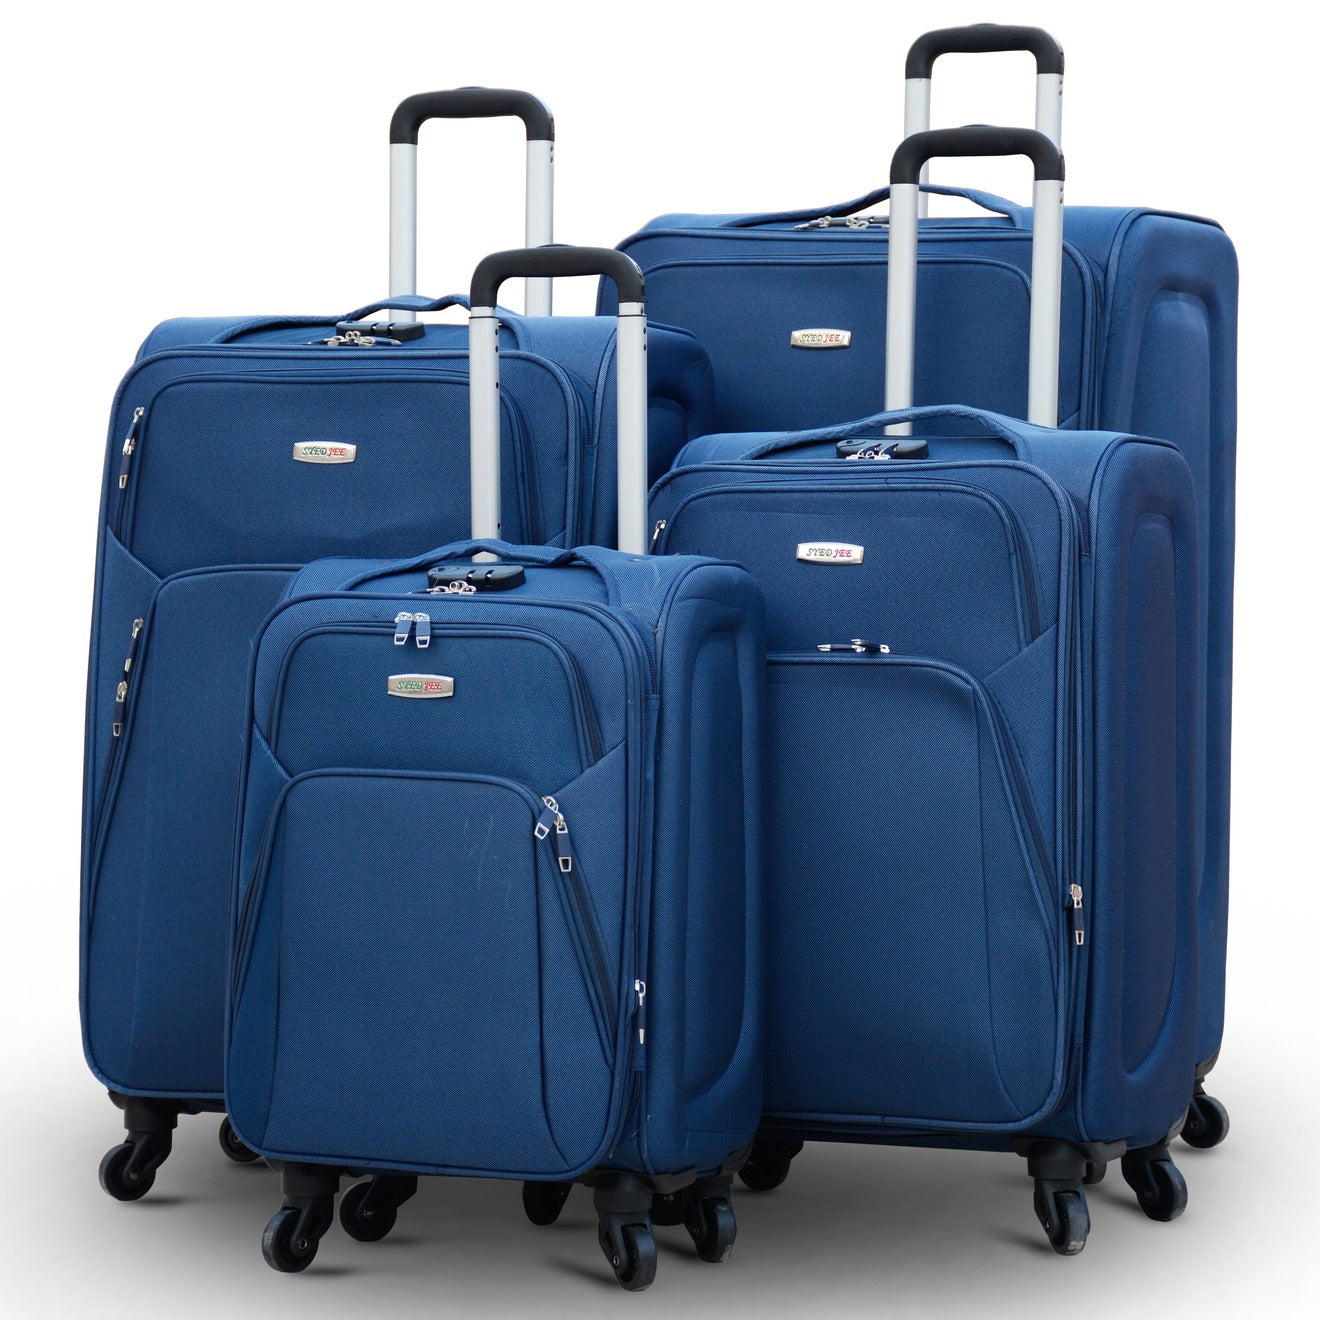 4 Pcs Set 20” 24” 28" 32 Inches Blue 4 Wheels Soft Material Luggage Lightweight Soft Shell